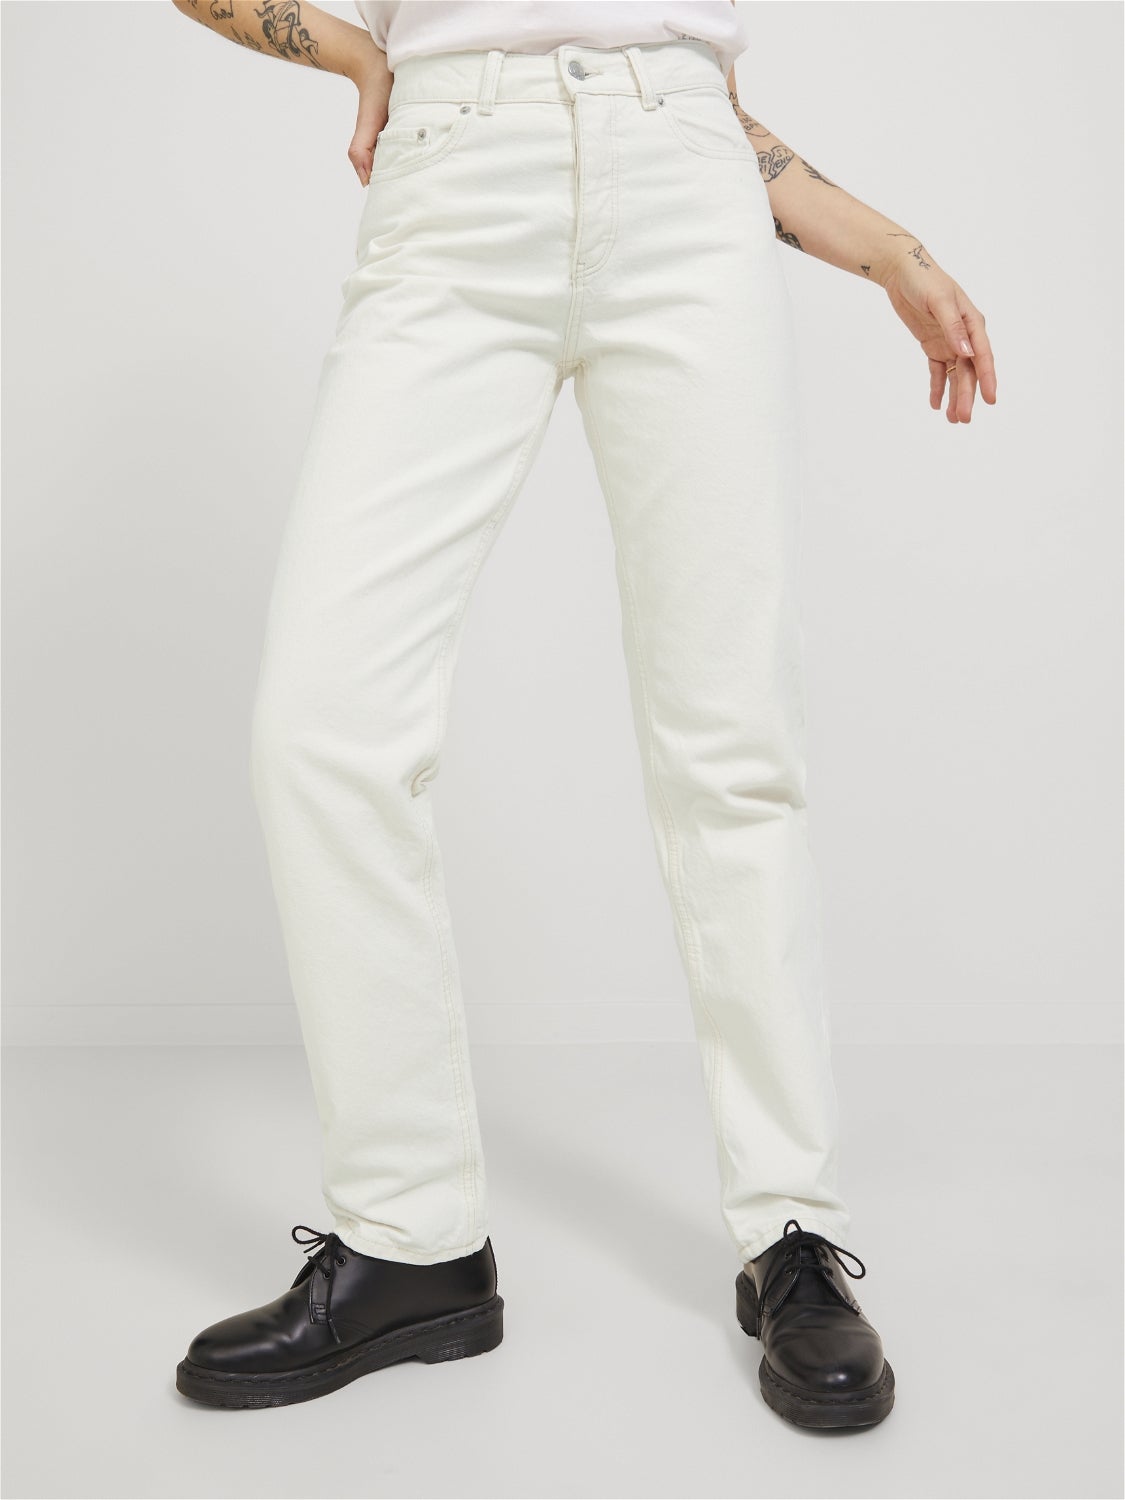 11 Best White Jeans for 2018 - Top White Skinny Jeans Women Can Wear After  Labor Day